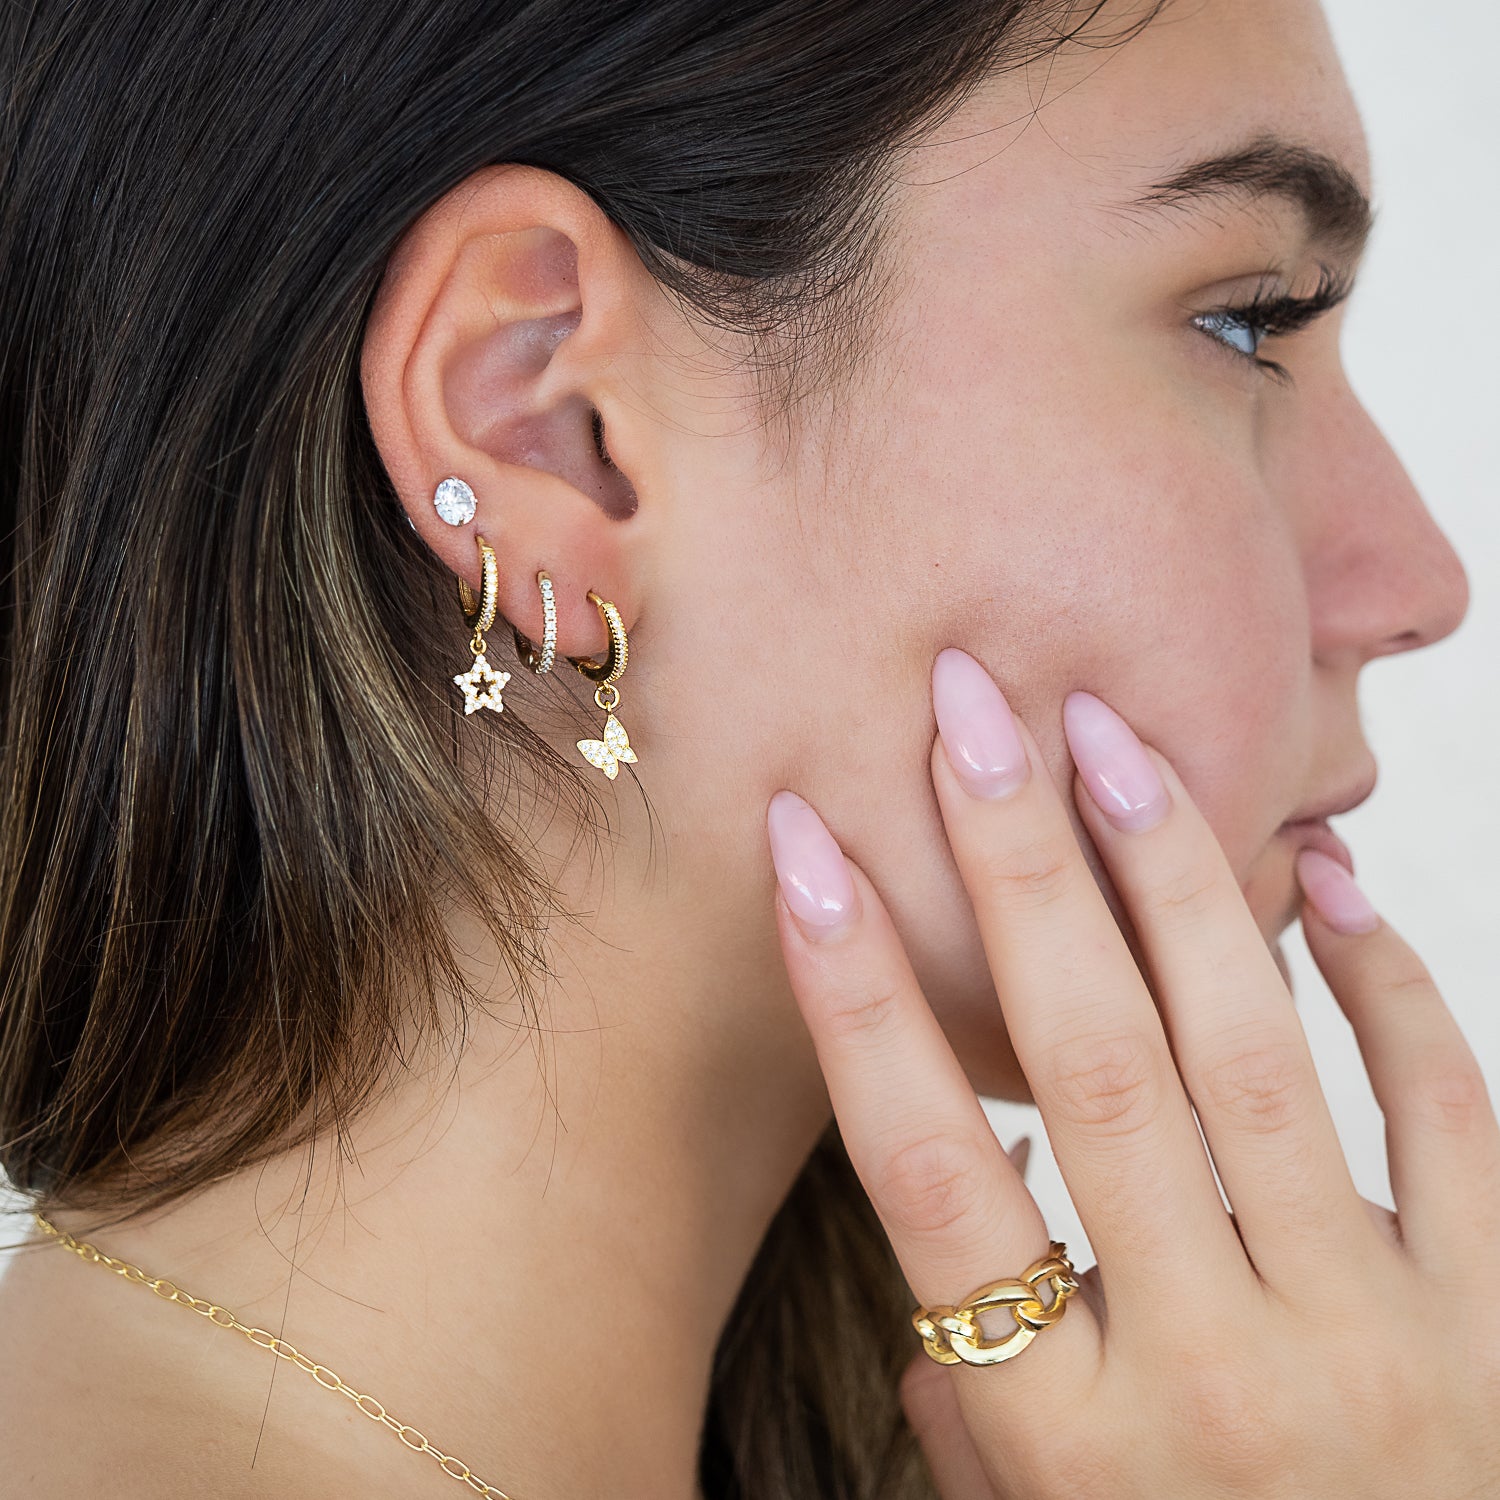 Model wearing the Gold Sparkly Butterfly Earrings, showcasing their elegance and grace